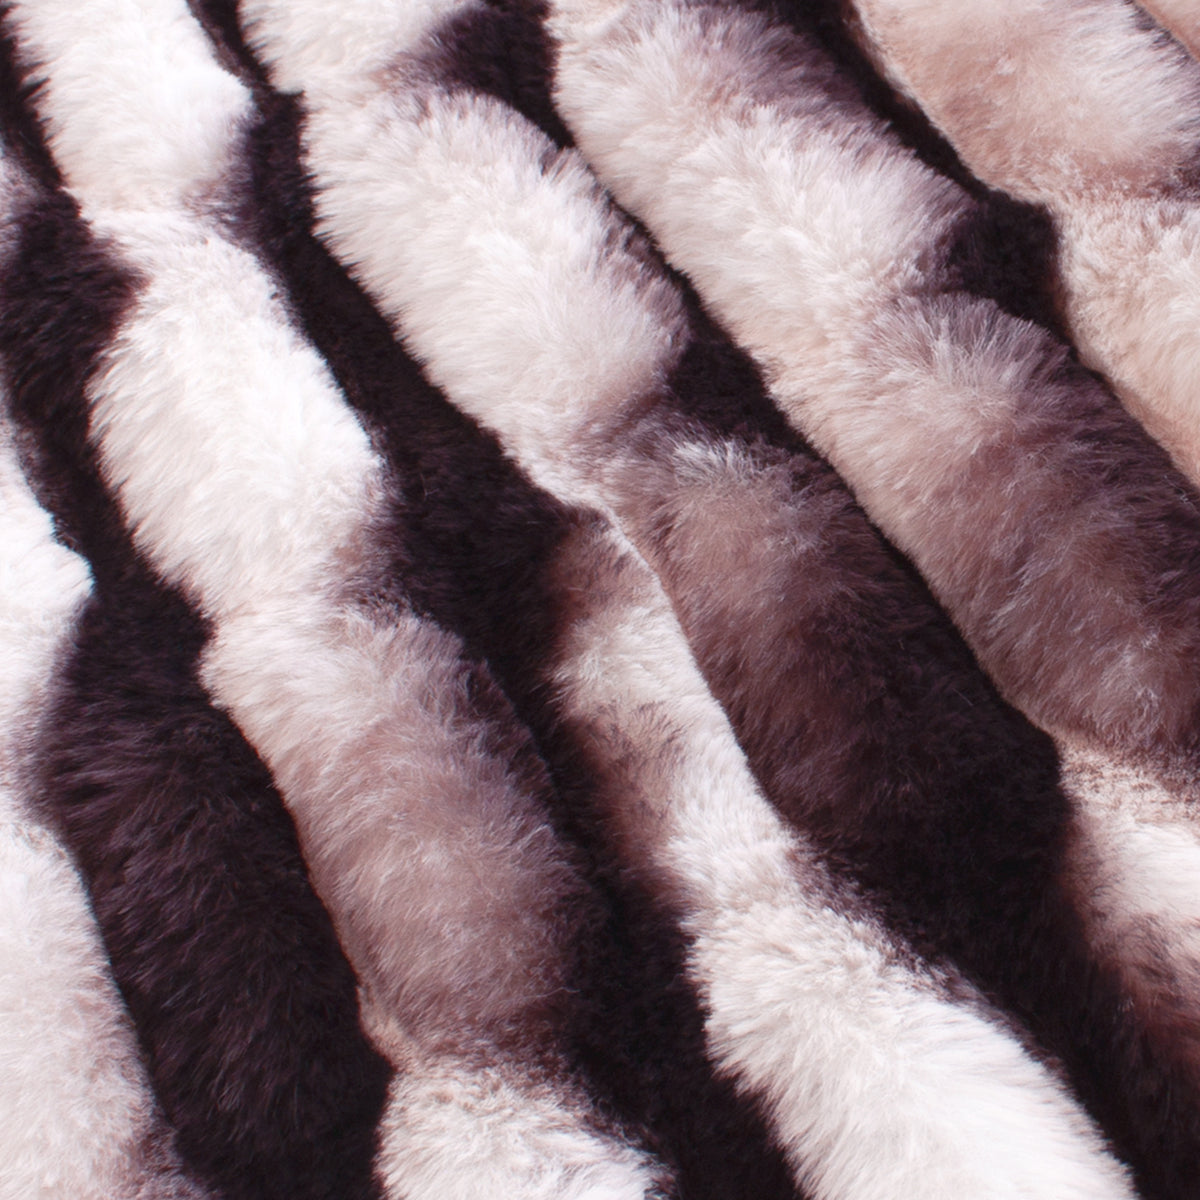 White/Red Violet EZ Fabric Stretch Faux Fur Snow Chinchilla Snuggle White/Red  Violet, Very Heavyweight Faux Fur Fabric, Home Decor Fabric